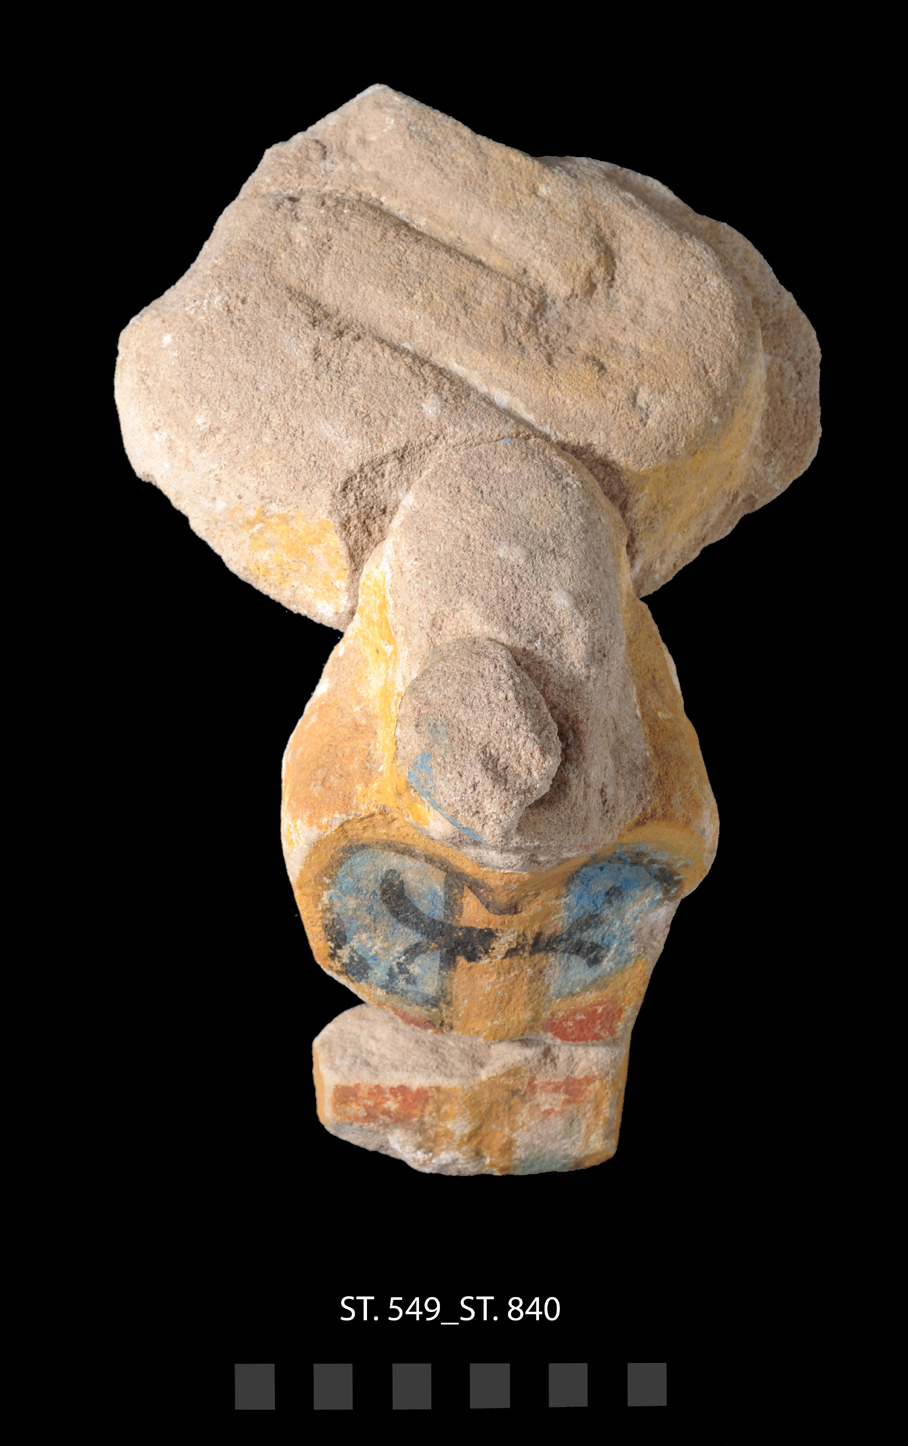 Ureus of the sphinx, restored by project participants, photo by A. Kamińska